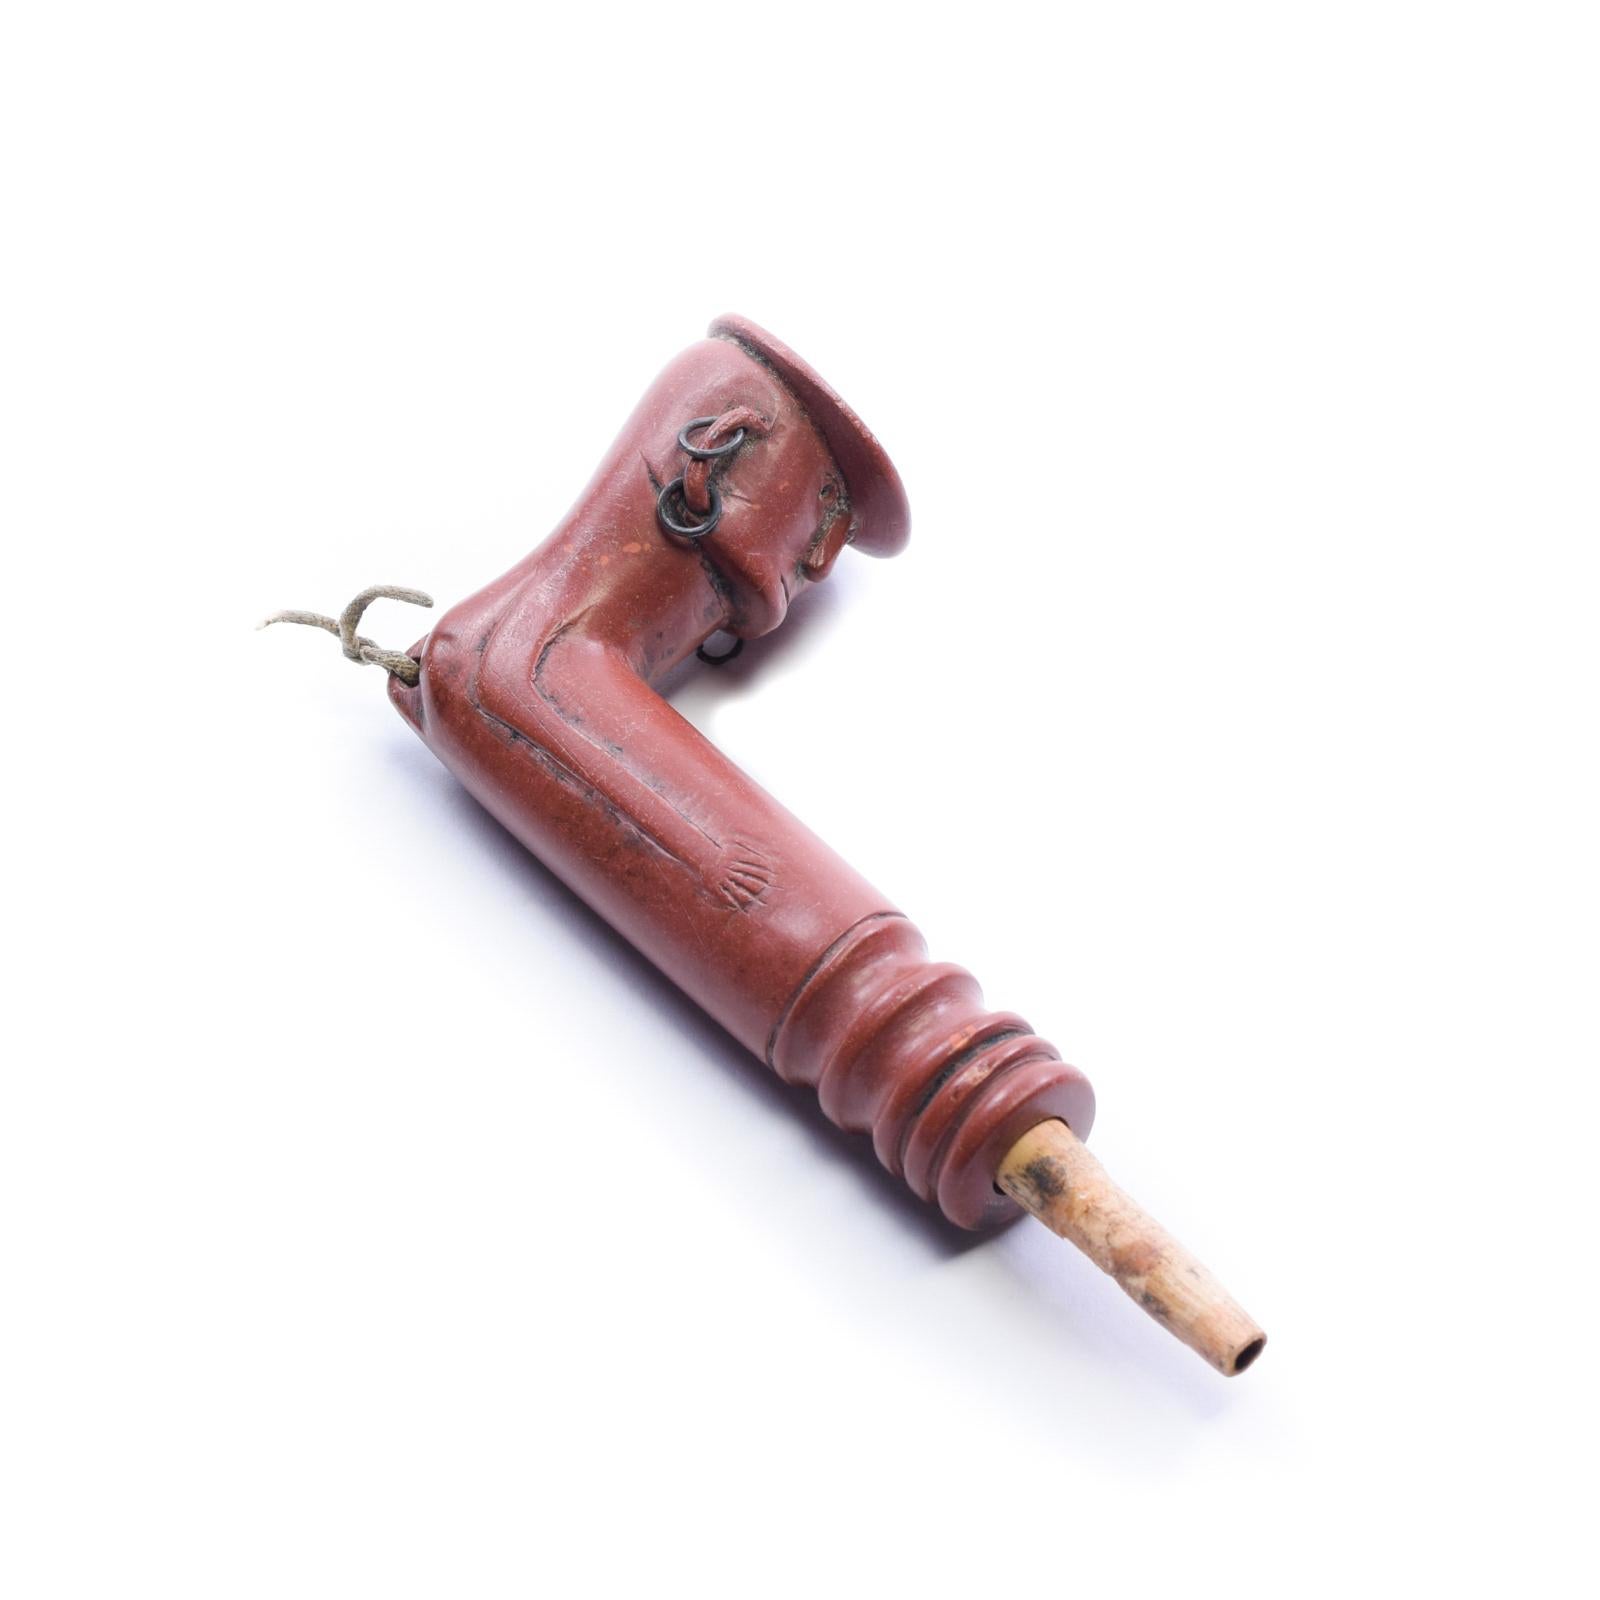 Pawnee/Sioux man figure pipe, with three-piece hand-carved spooled Catlinite stem; over 36